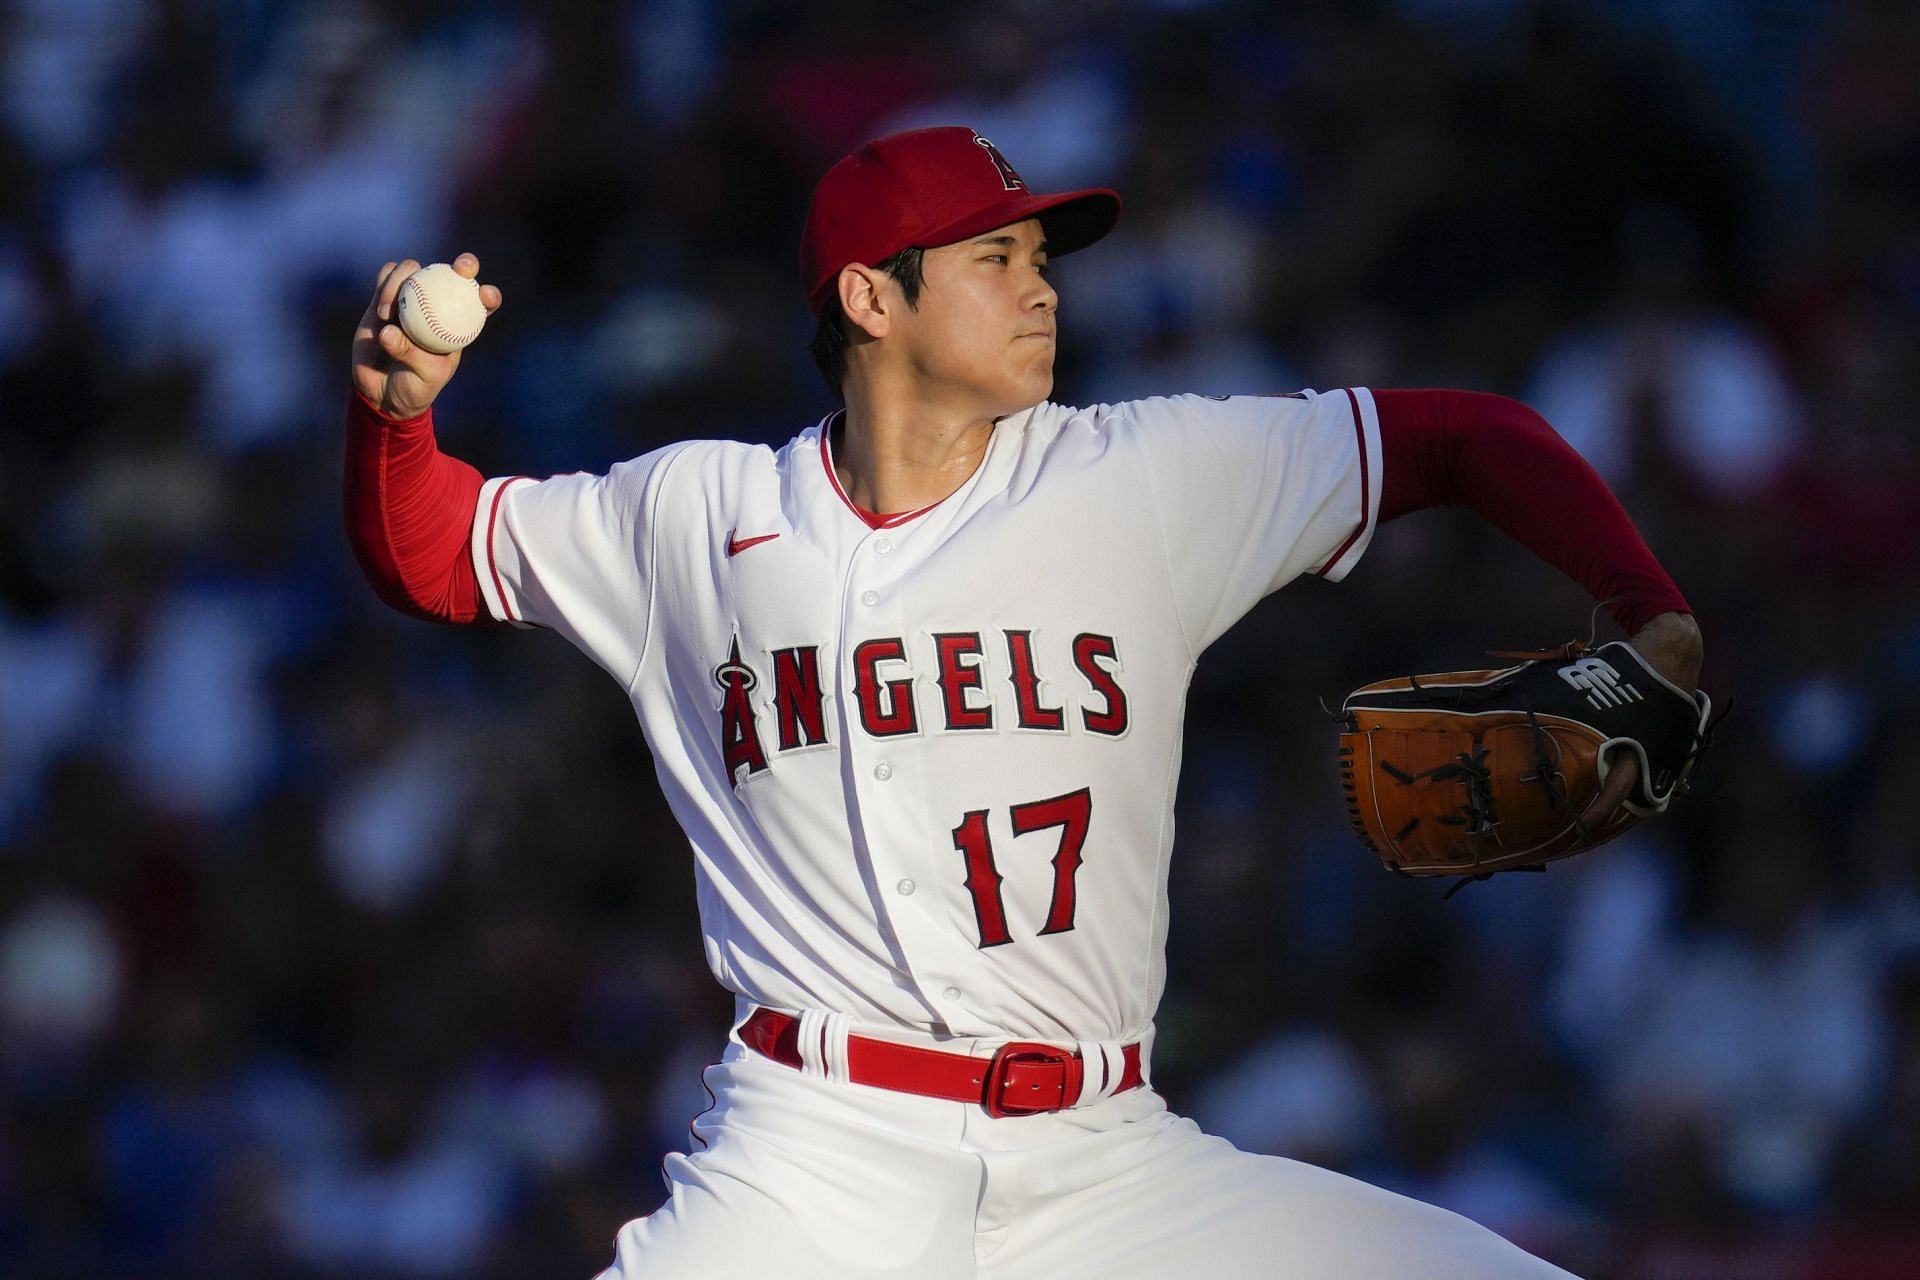 Shohei Ohtani’s average yearly salary is higher than Lionel Messi’s and Patrick Mahomes’.